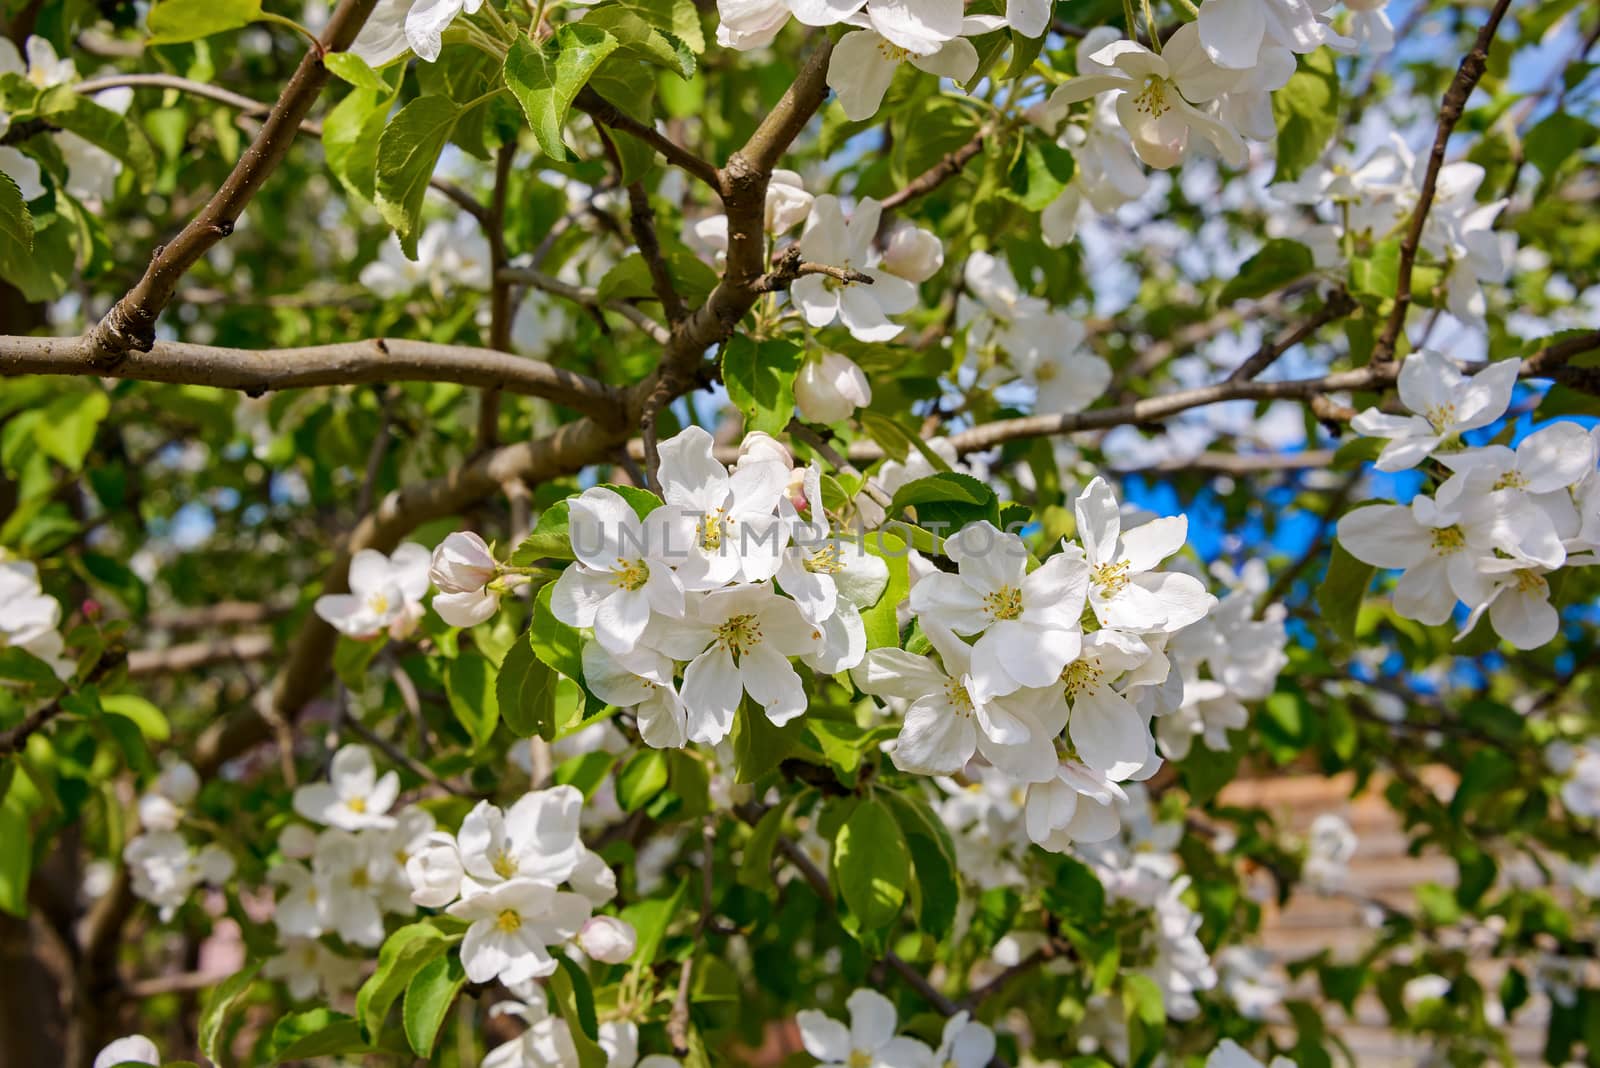 Apple blossoms in spring on branches with velvety green leaves in sunlight.